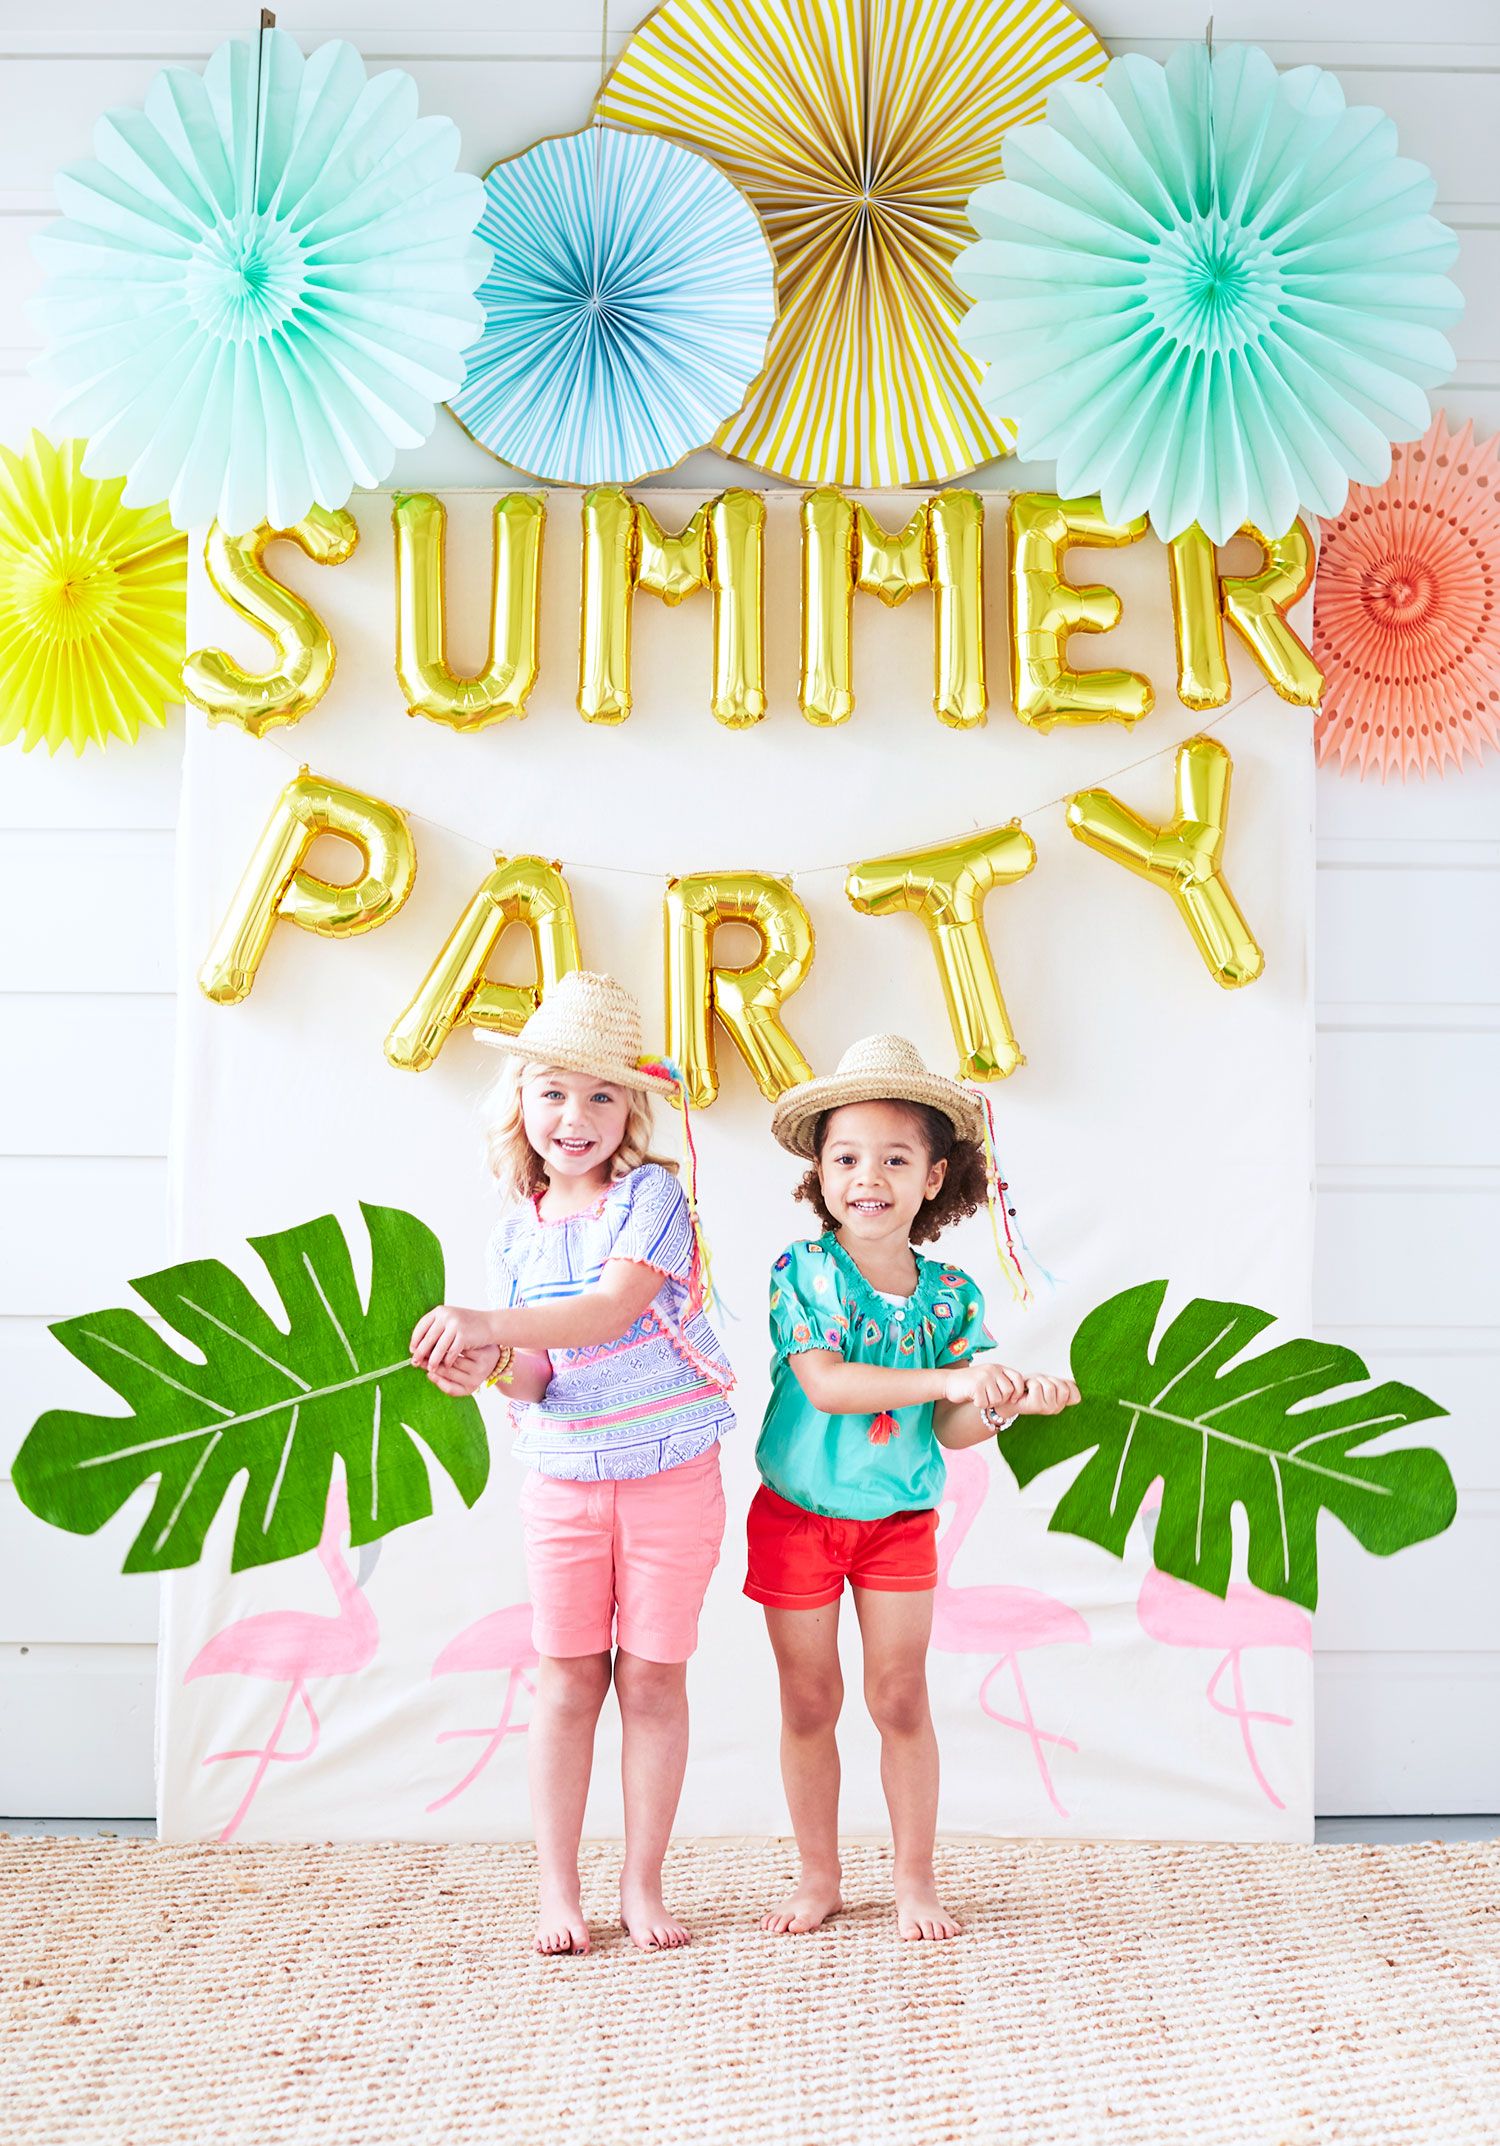 15 Summer Party Decoration Ideas We Love on Love the Day